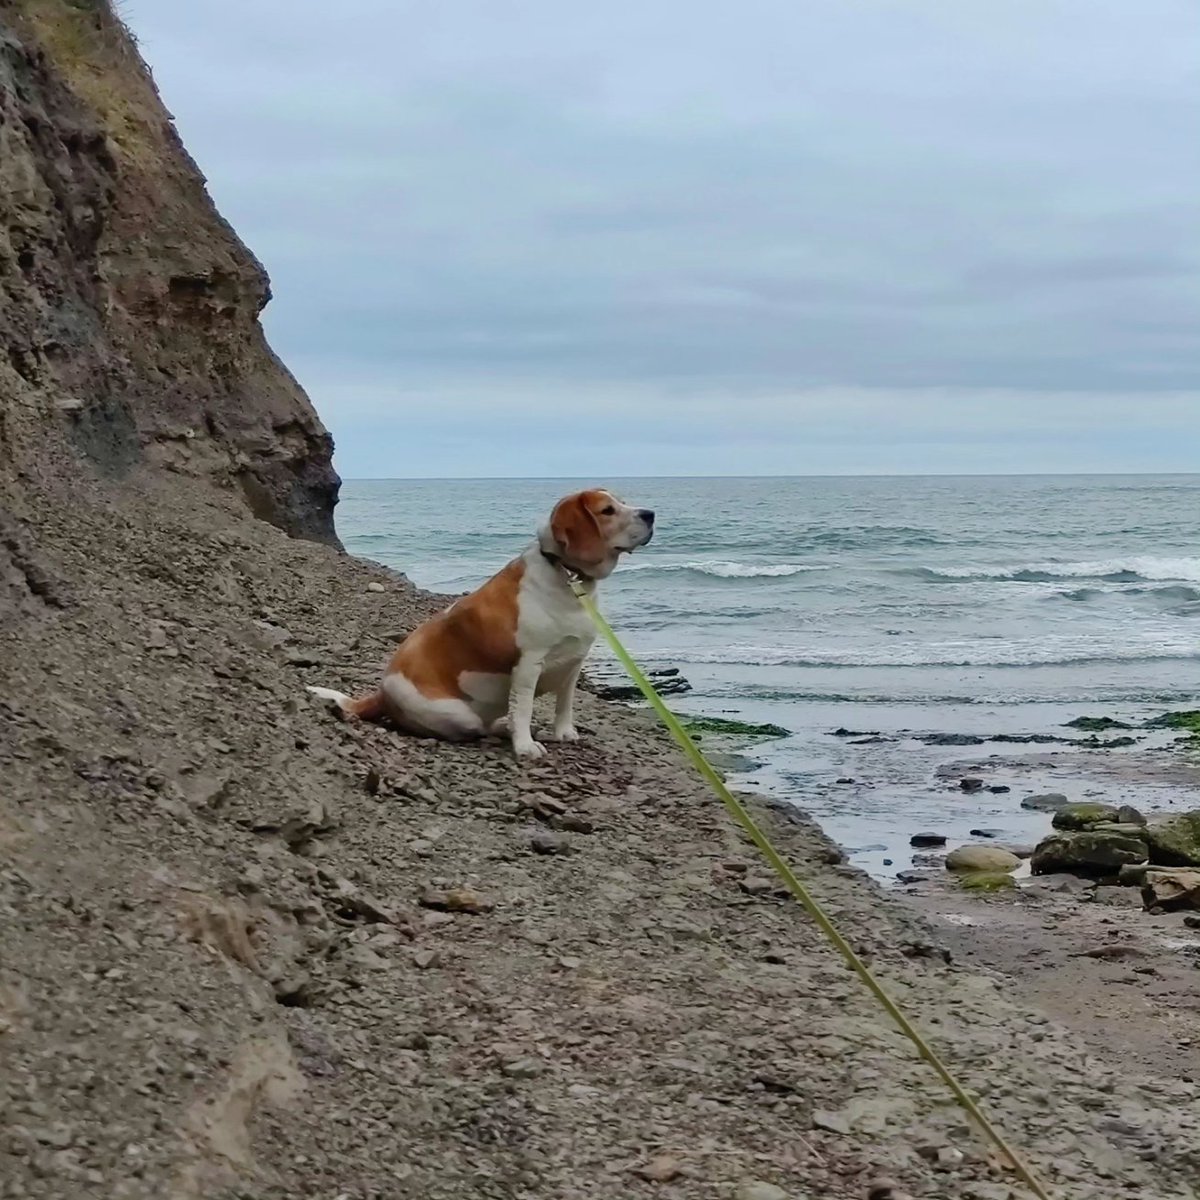 Lilly at Boggle Hole, catching some sea air🥰
#beagle #Robinhoodsbay  #bogglehole  #NorthYorkshire